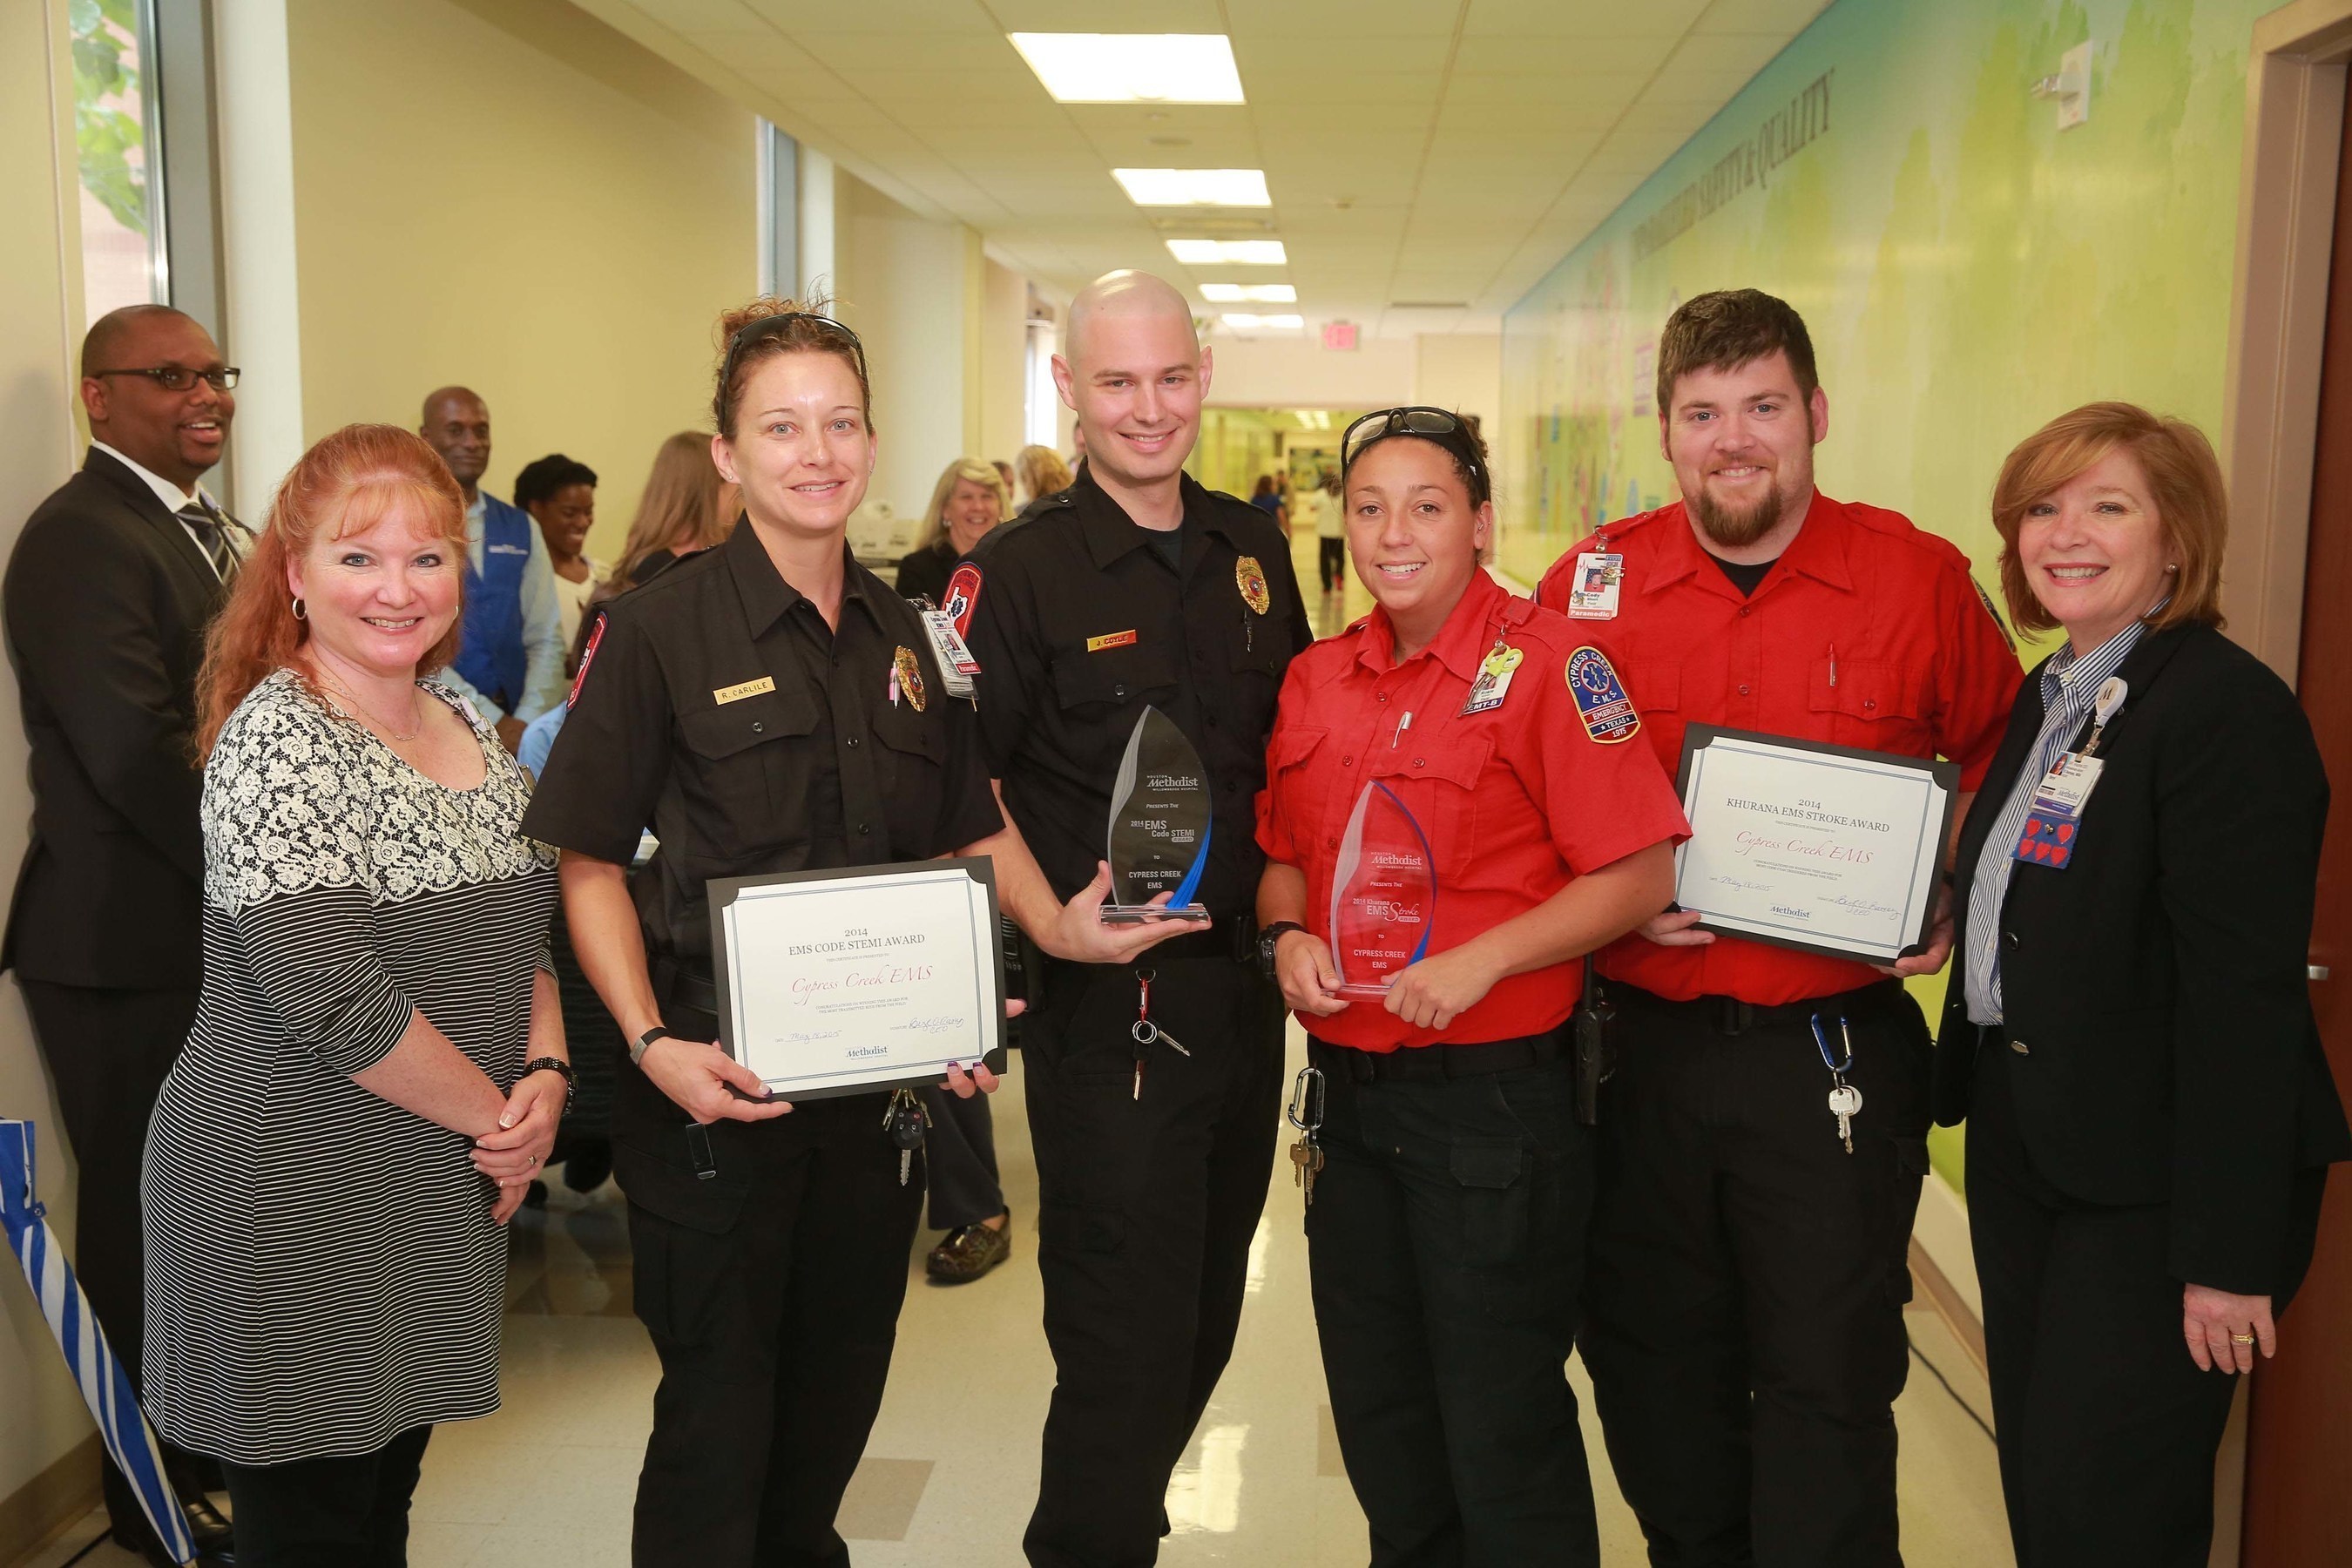 Members of Cypress Creek EMS receive the EMS Code STEMI and the Khurana EMS Stroke awards from Houston Methodist Willowbrook Hospital executives during National EMS Week.